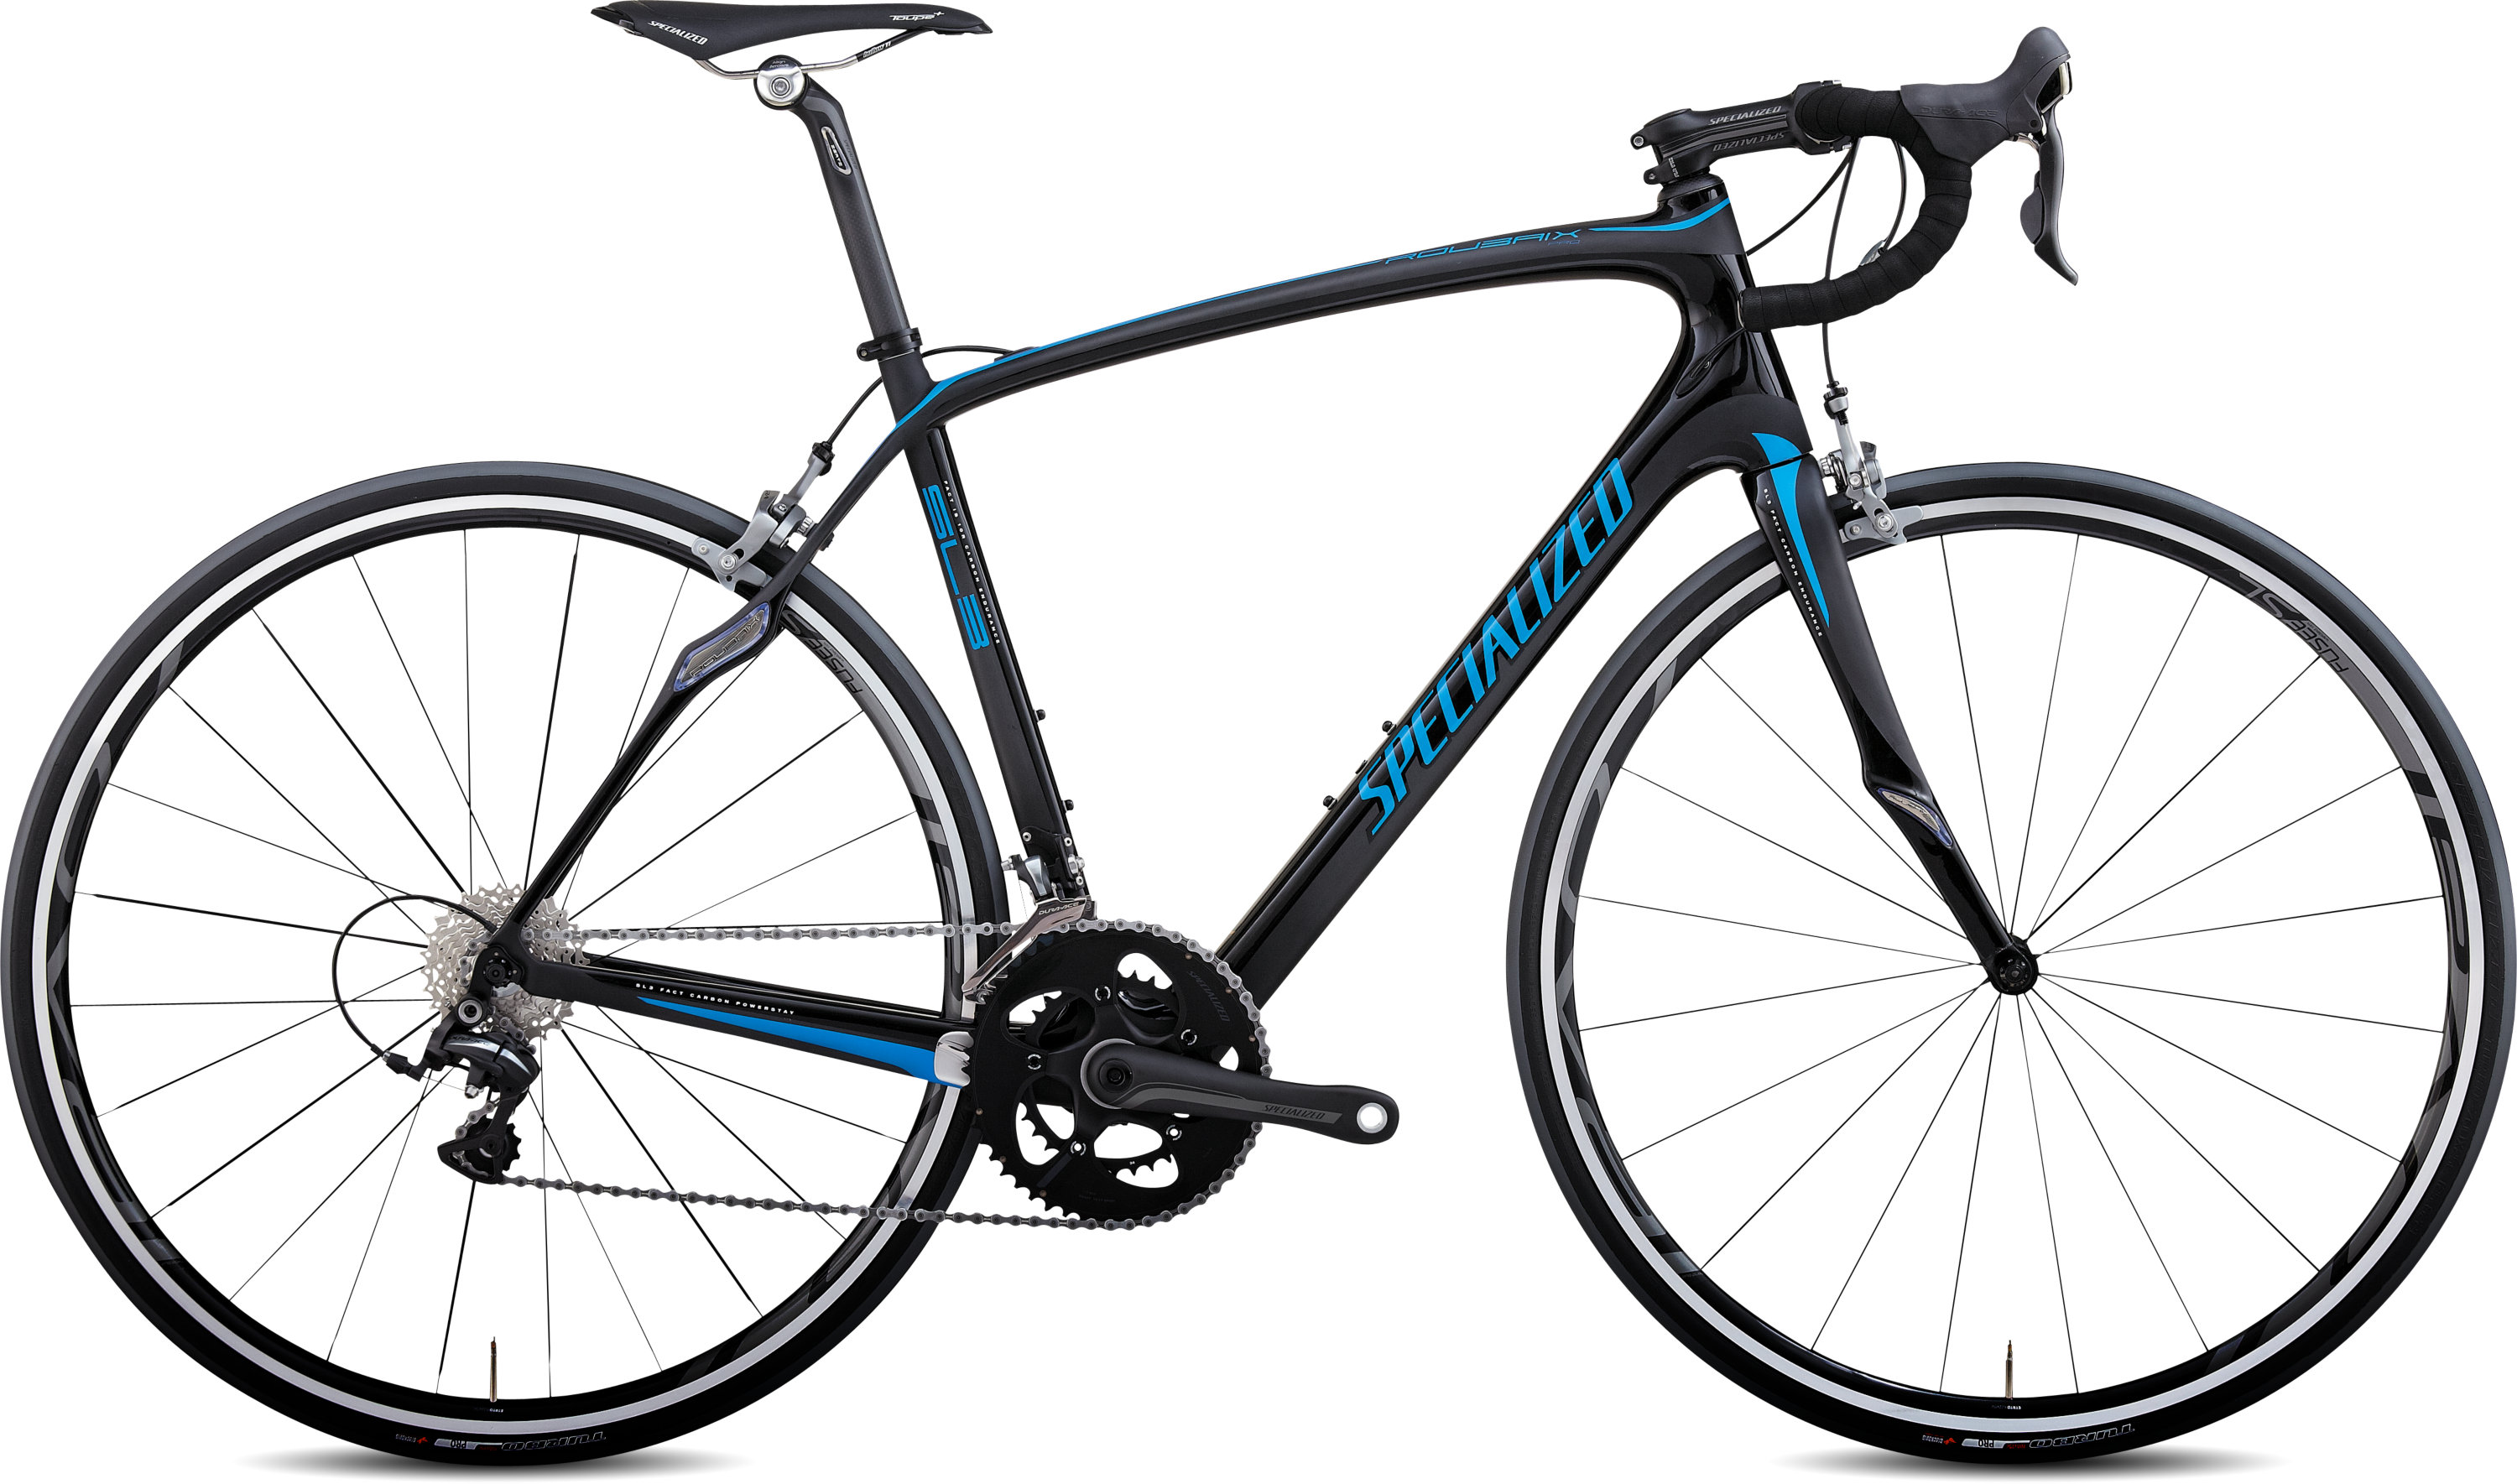 bicycle 24 inch online